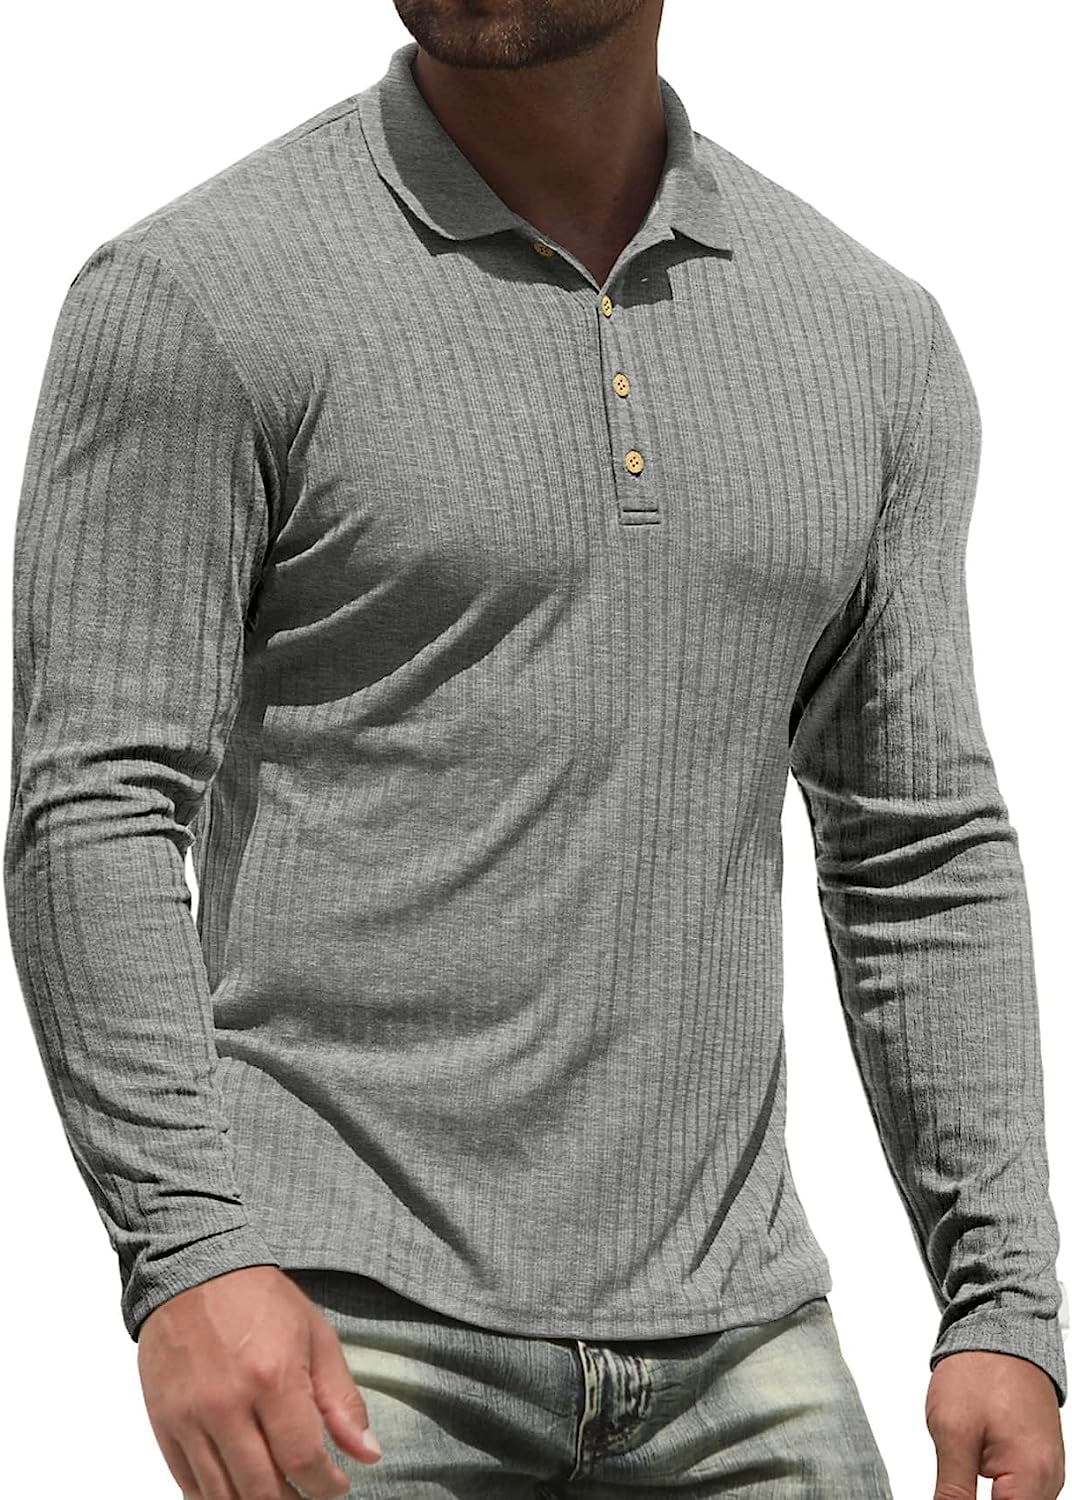 Iceglad Men's Polo Shirts long Sleeve Casual Slim Fit Workout Shirts ...